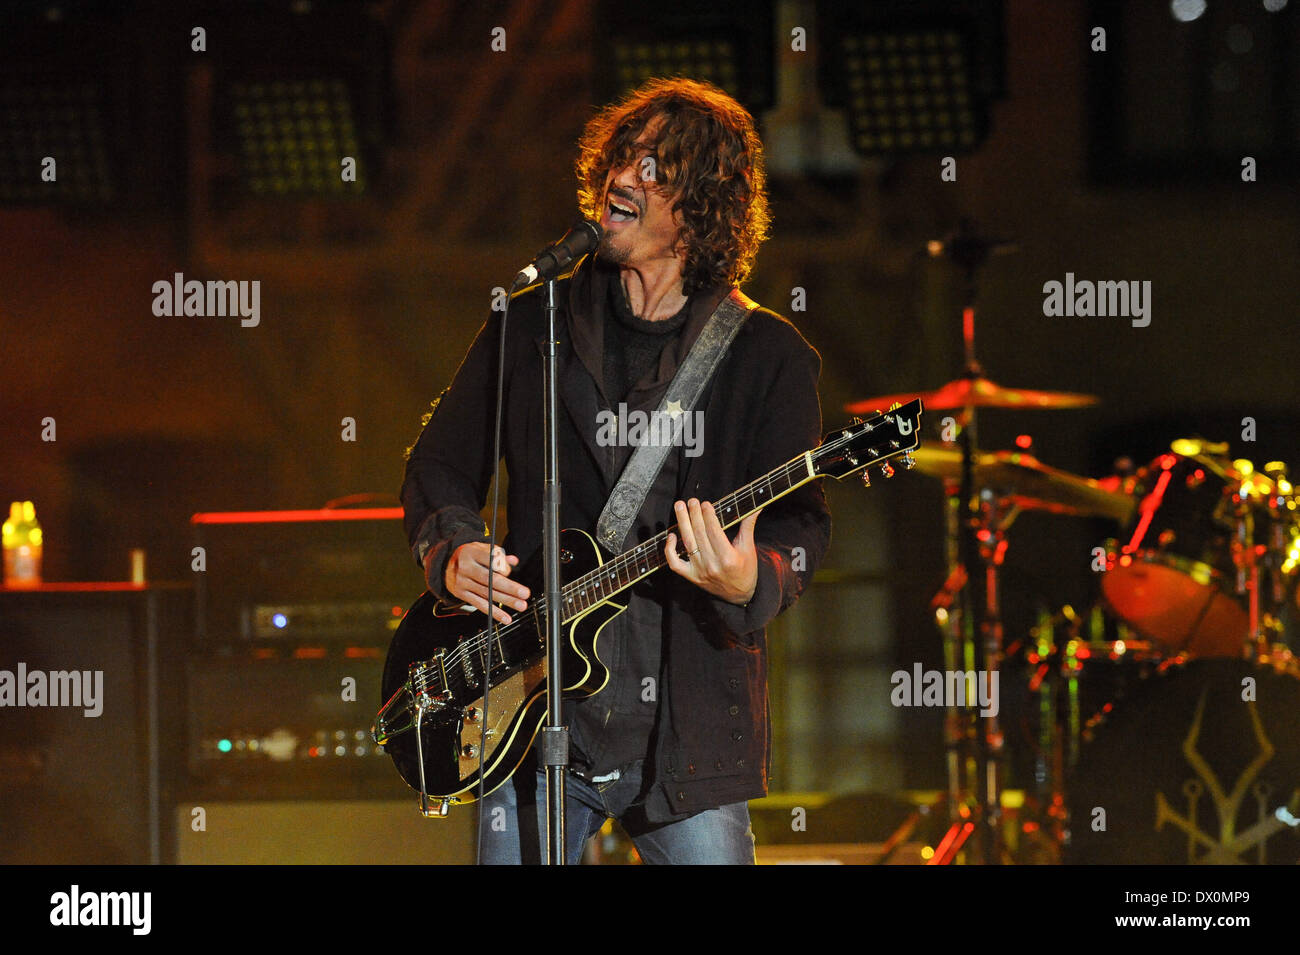 Austin, Texas, USA. 14th Mar, 2014. Chris Cornell of Soundgarden performs in concert at the Guitar Center Direct TV live stream show from a roof top party during South By Southwest (SXSW) on March 14, 2014 in Austin, Texas - USA (Photo by Manuel Nauta/NurPhoto) Credit:  Manuel Nauta/NurPhoto/ZUMAPRESS.com/Alamy Live News Stock Photo